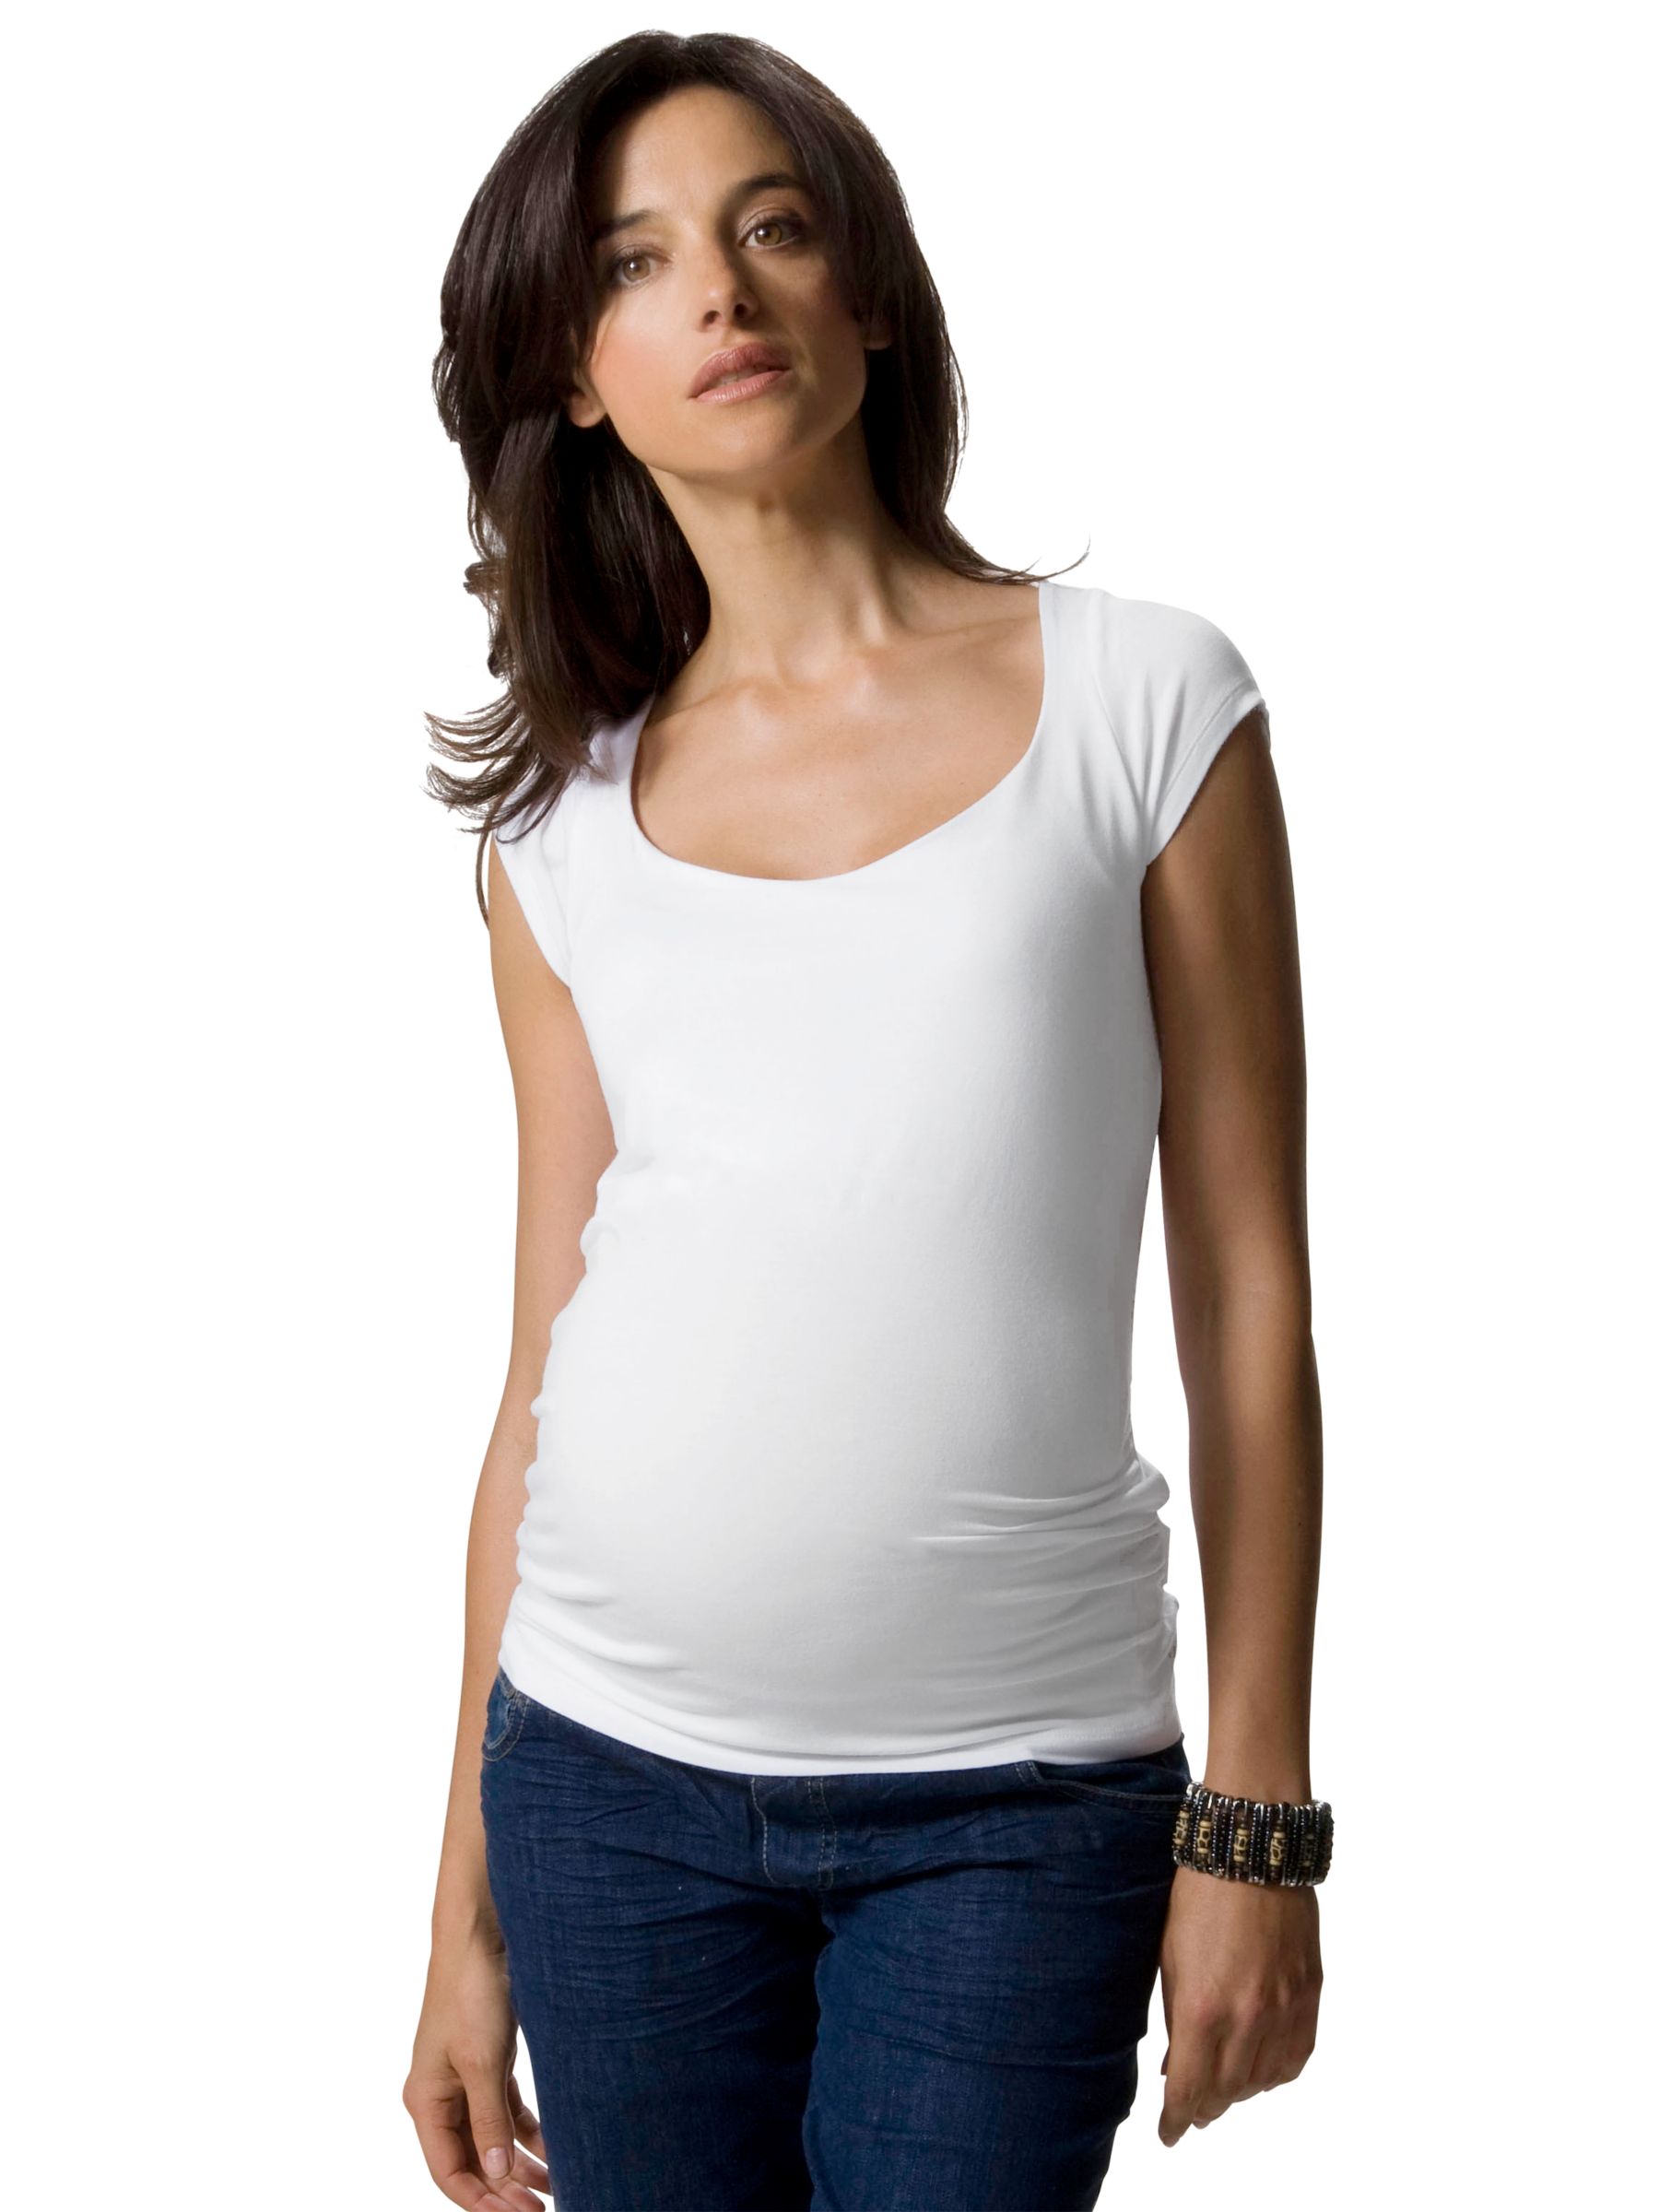 Crave Maternity Scoop Neck T-Shirt, White